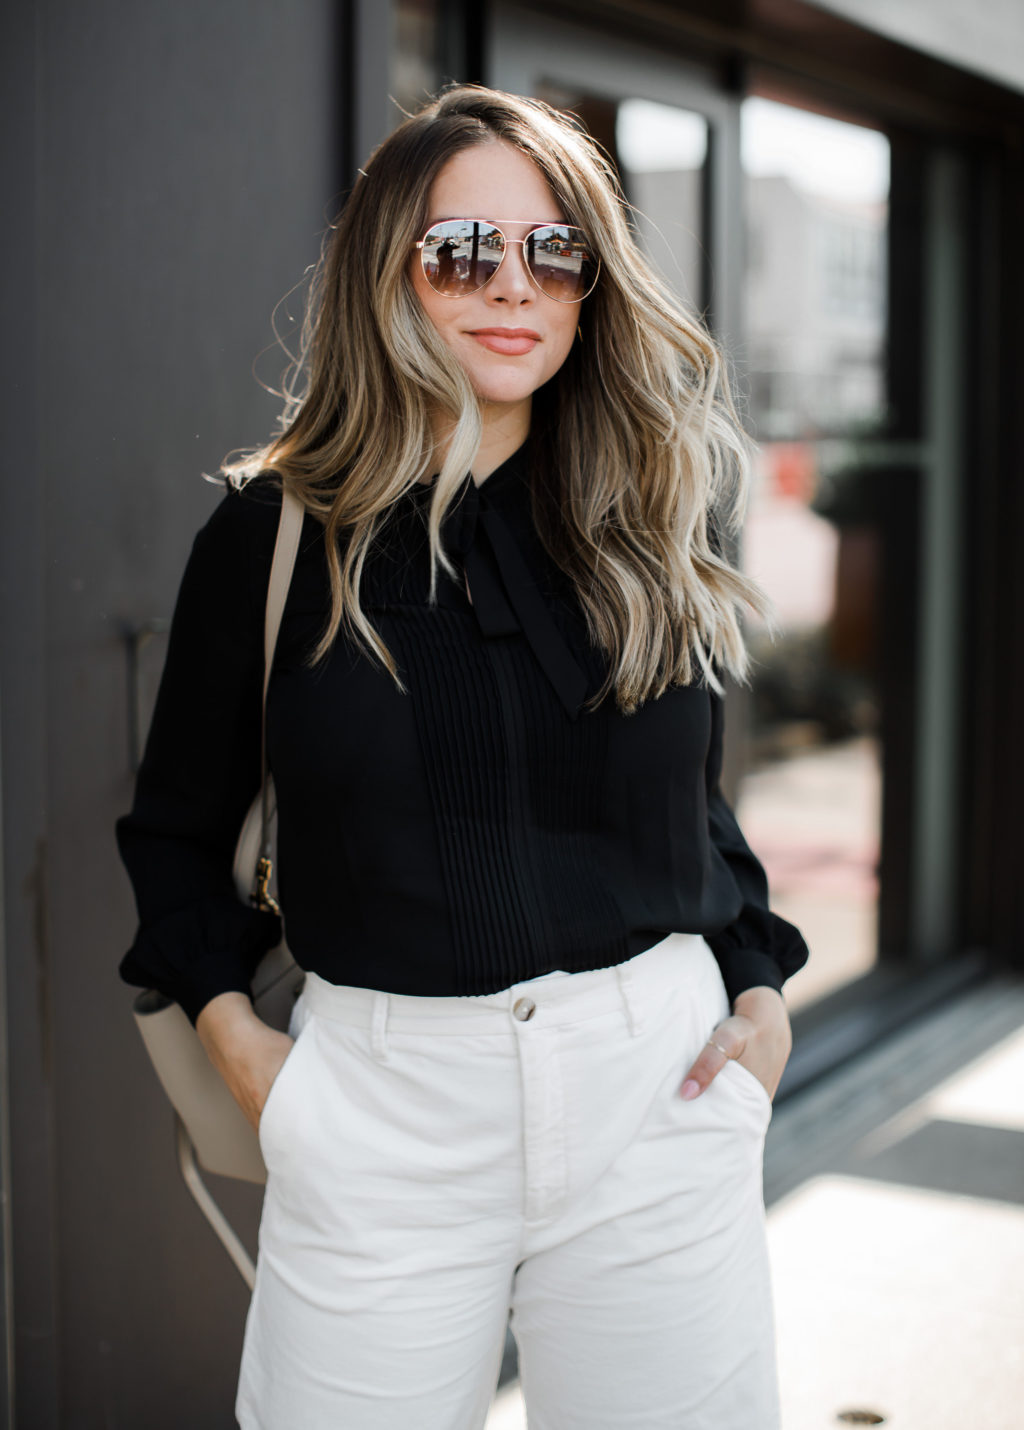 2 Ways To Style Cropped Pants for Fall | The Teacher Diva: a Dallas ...